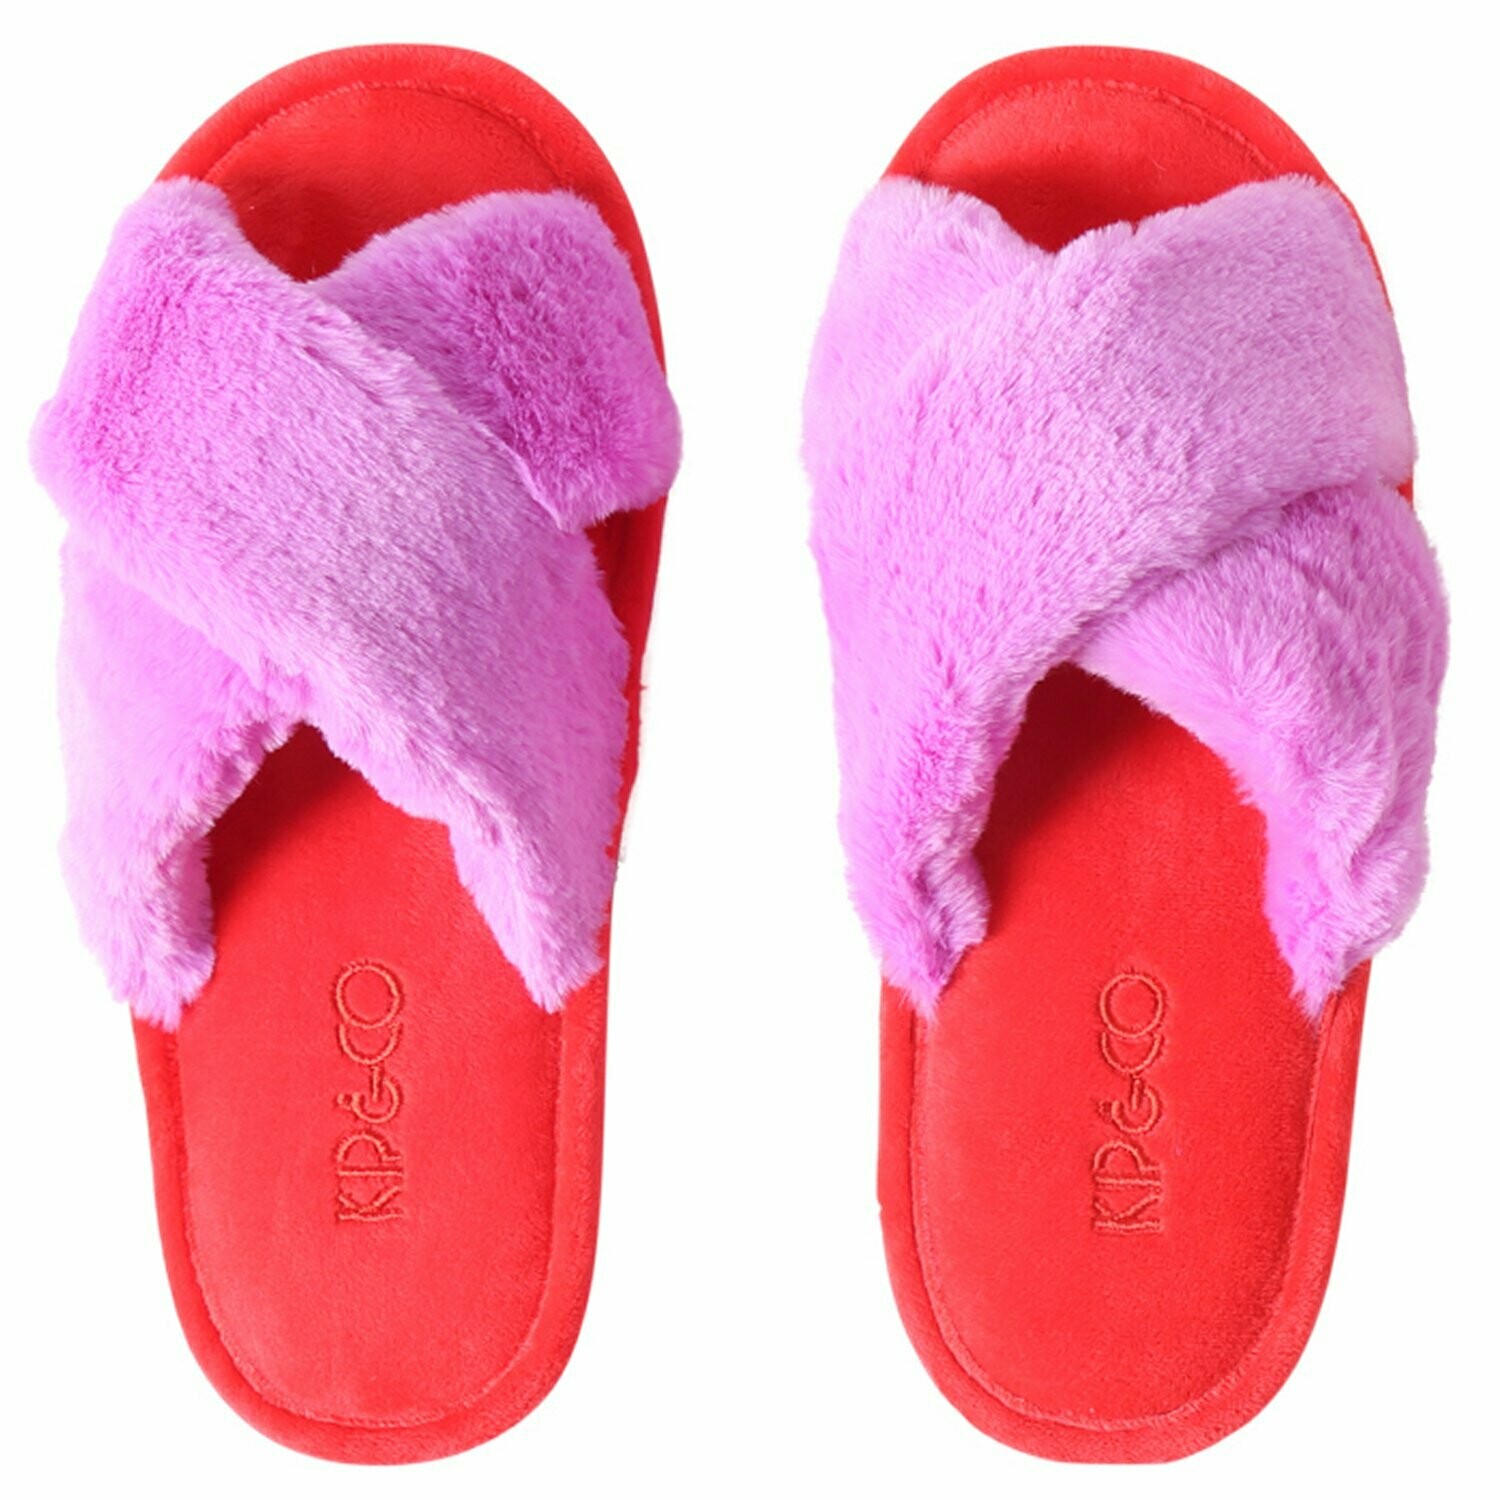 Adult Slippers - Raspberry Bubble - Size 35/36